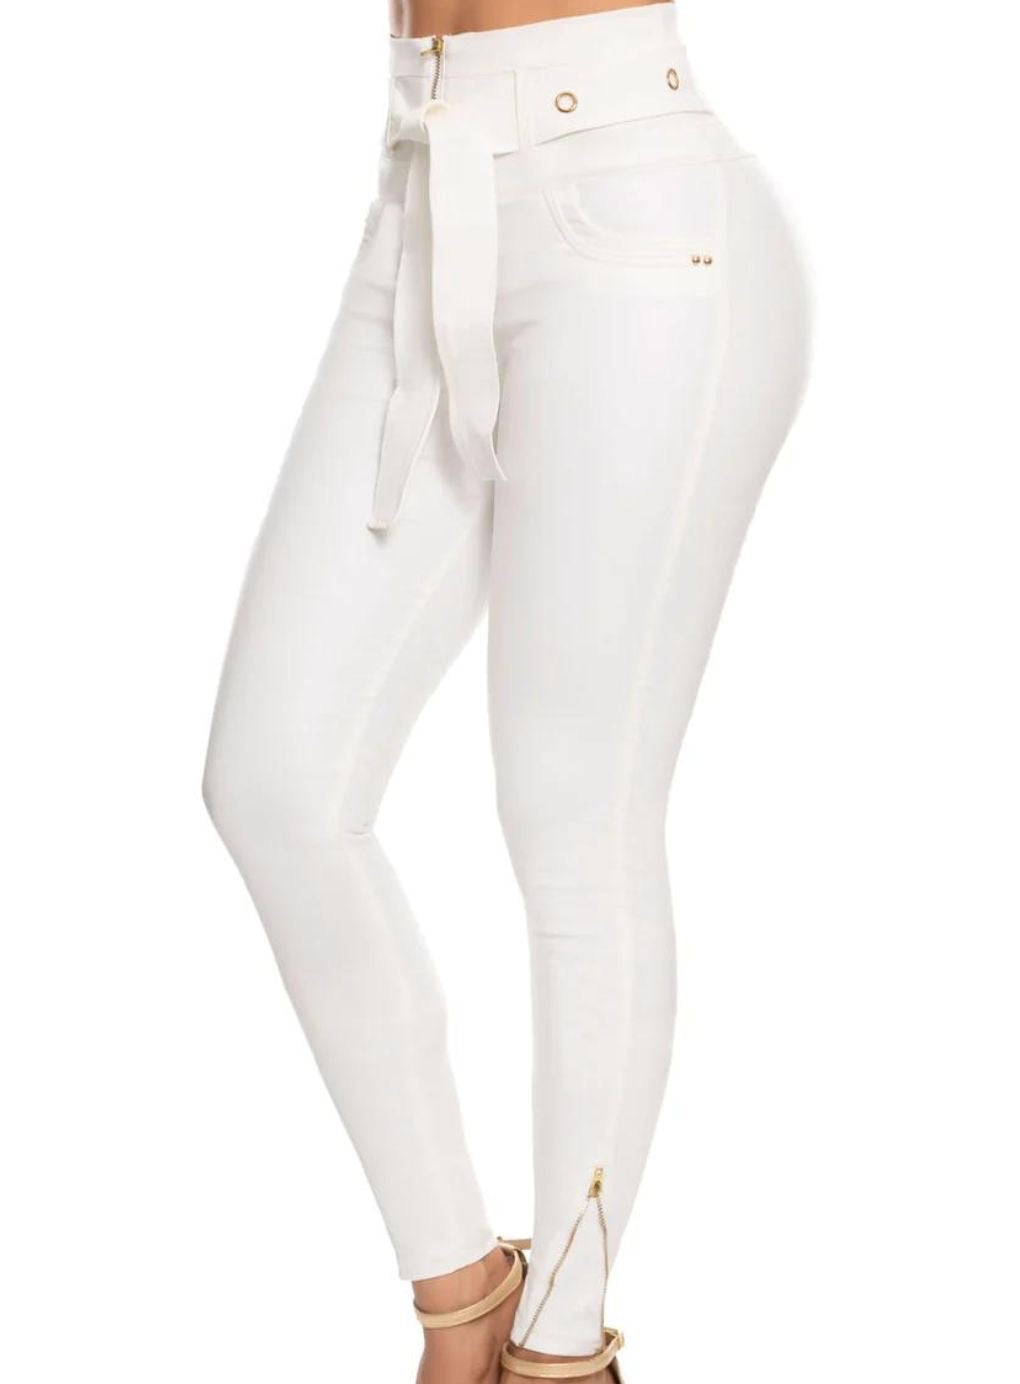 Leather Look Butt Lift Front Zipper White Pants